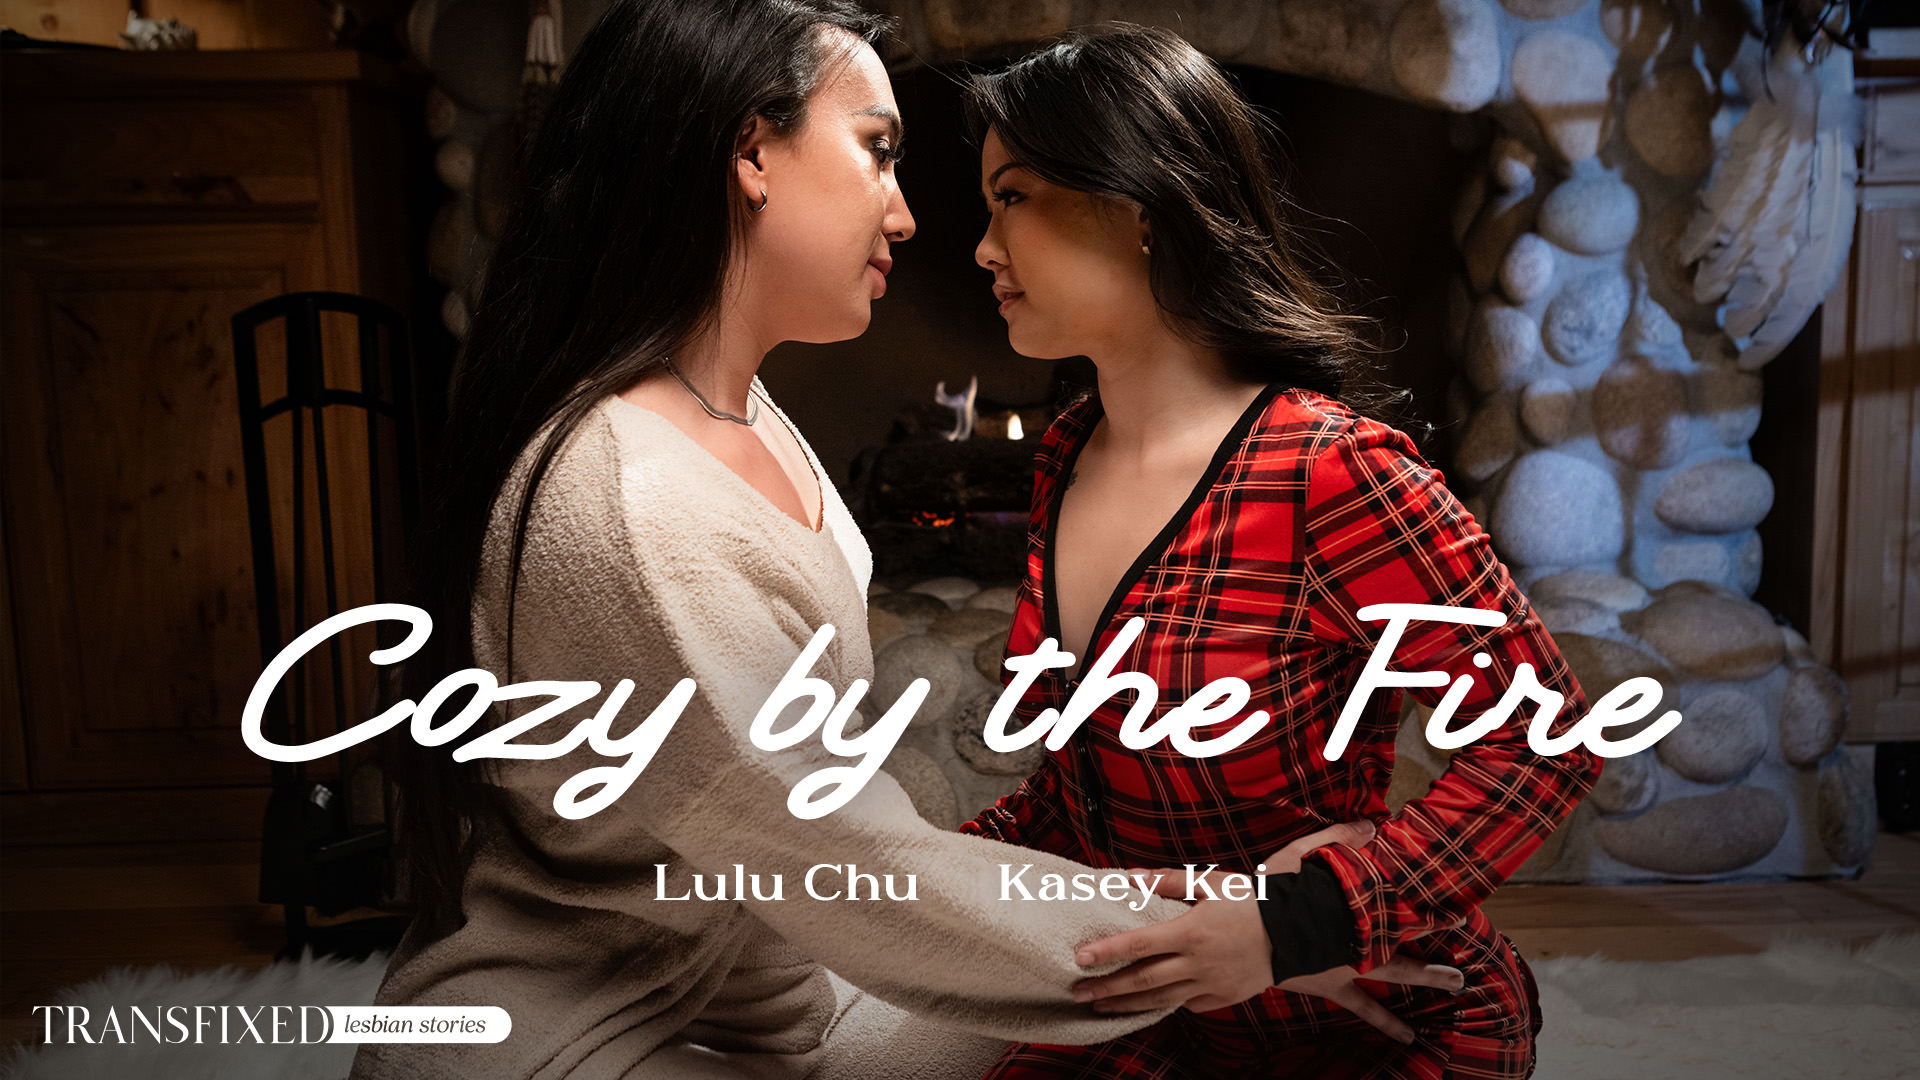 Cozy by the Fire in Transfixed series with Lulu Chu, Kasey Kei by Adult Time